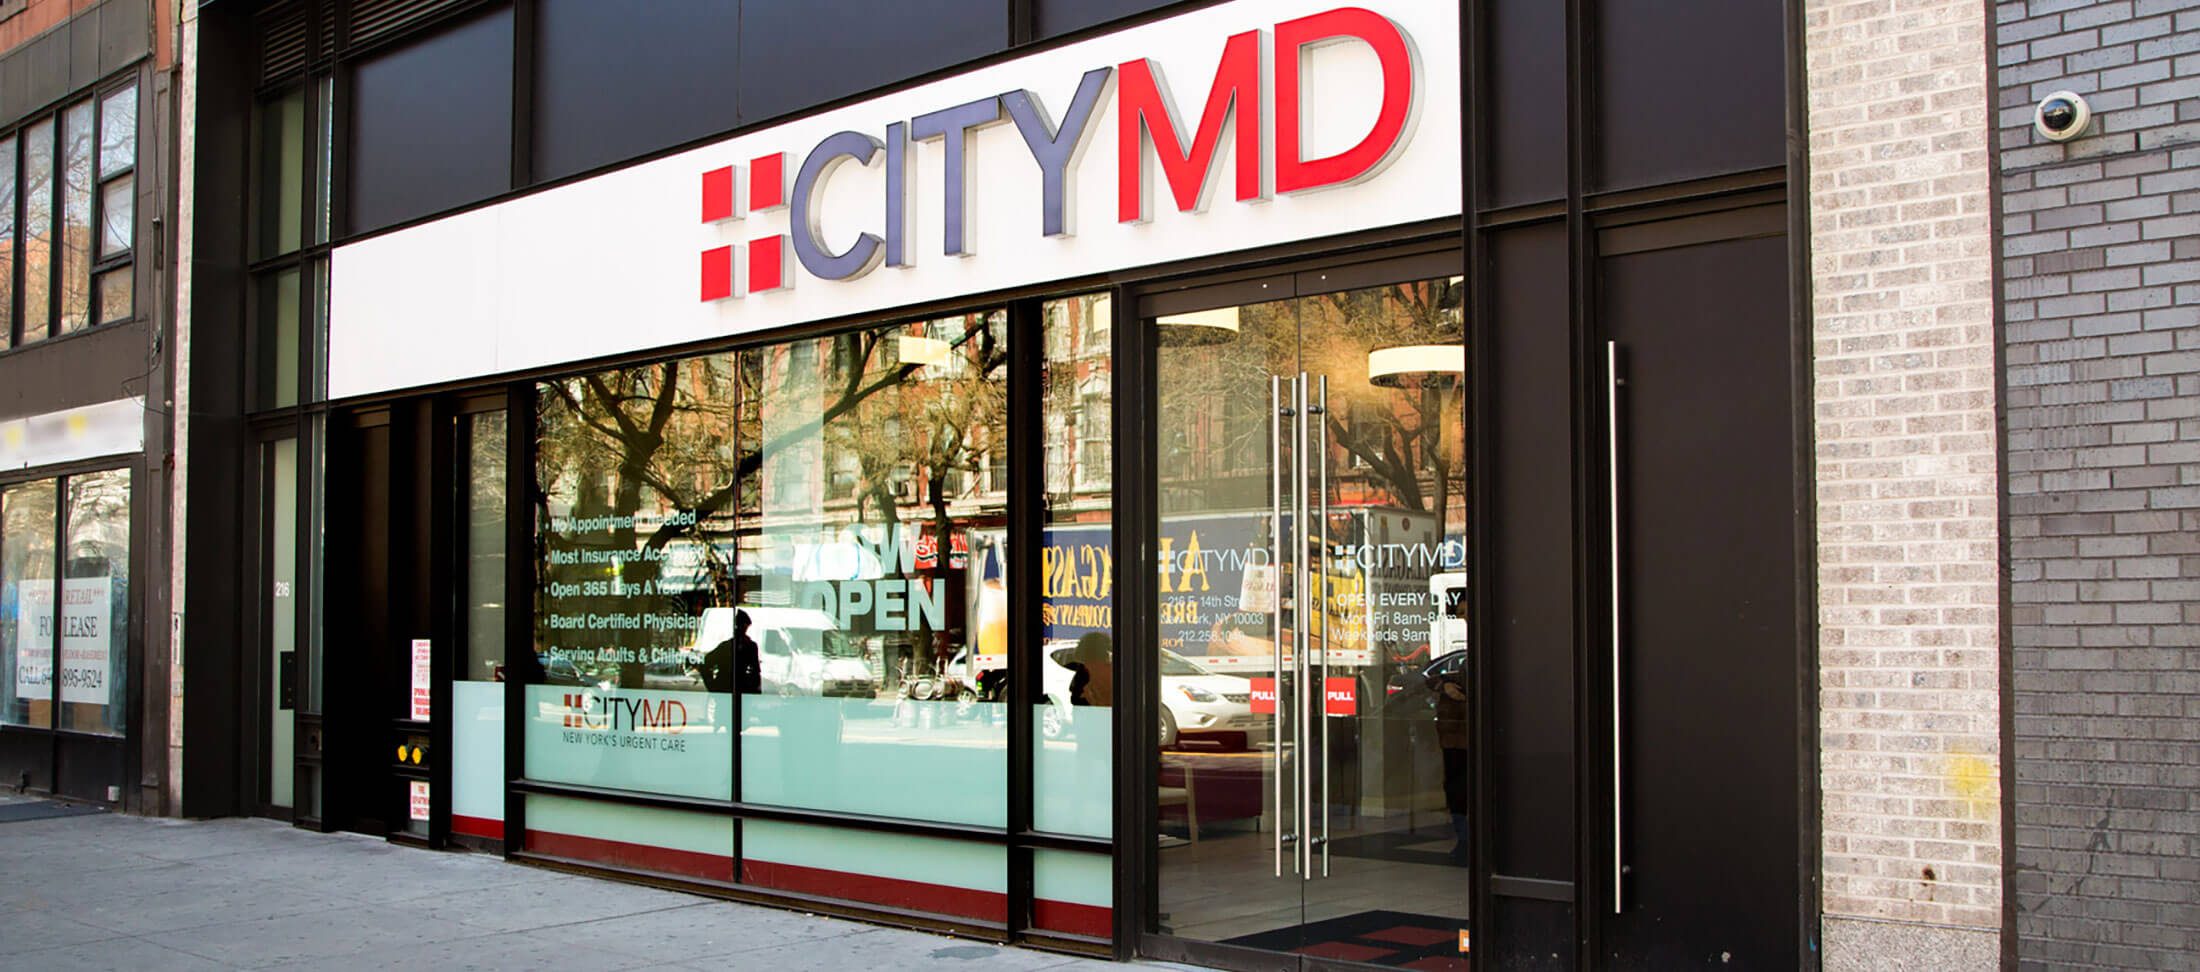 mPulse Mobile Partners with CityMD to Engage Patients on Their Path Back to Health Across Over 85 Urgent Care Centers